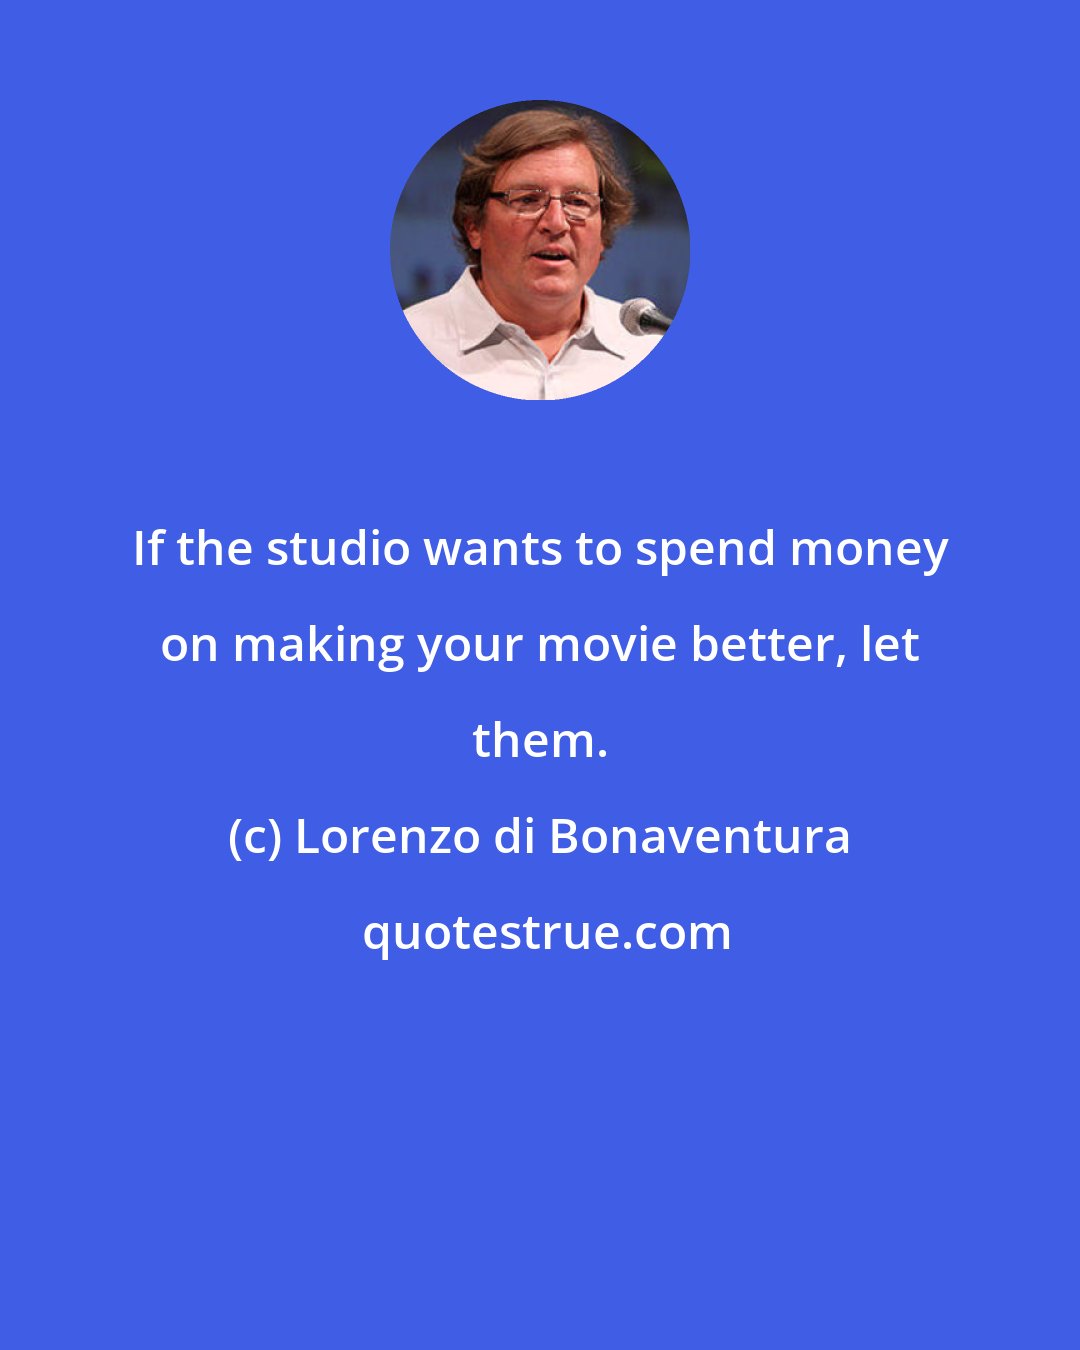 Lorenzo di Bonaventura: If the studio wants to spend money on making your movie better, let them.